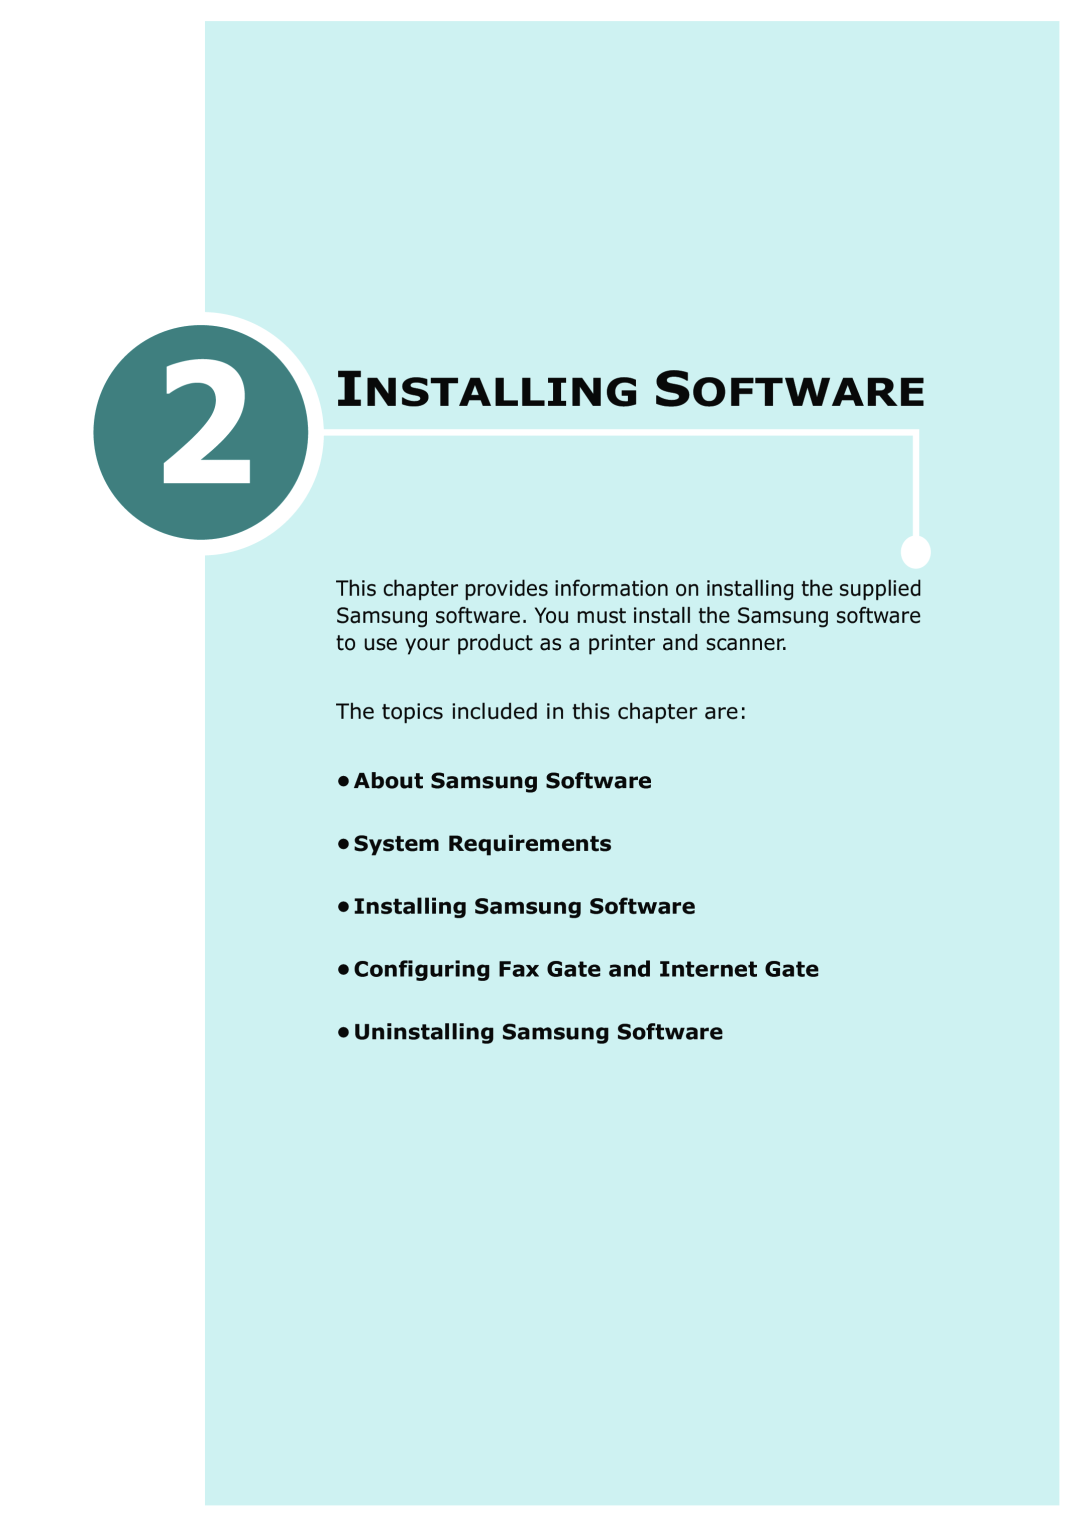 Samsung SCX-1100 manual Installing Software, About Samsung Software System Requirements, Uninstalling Samsung Software 